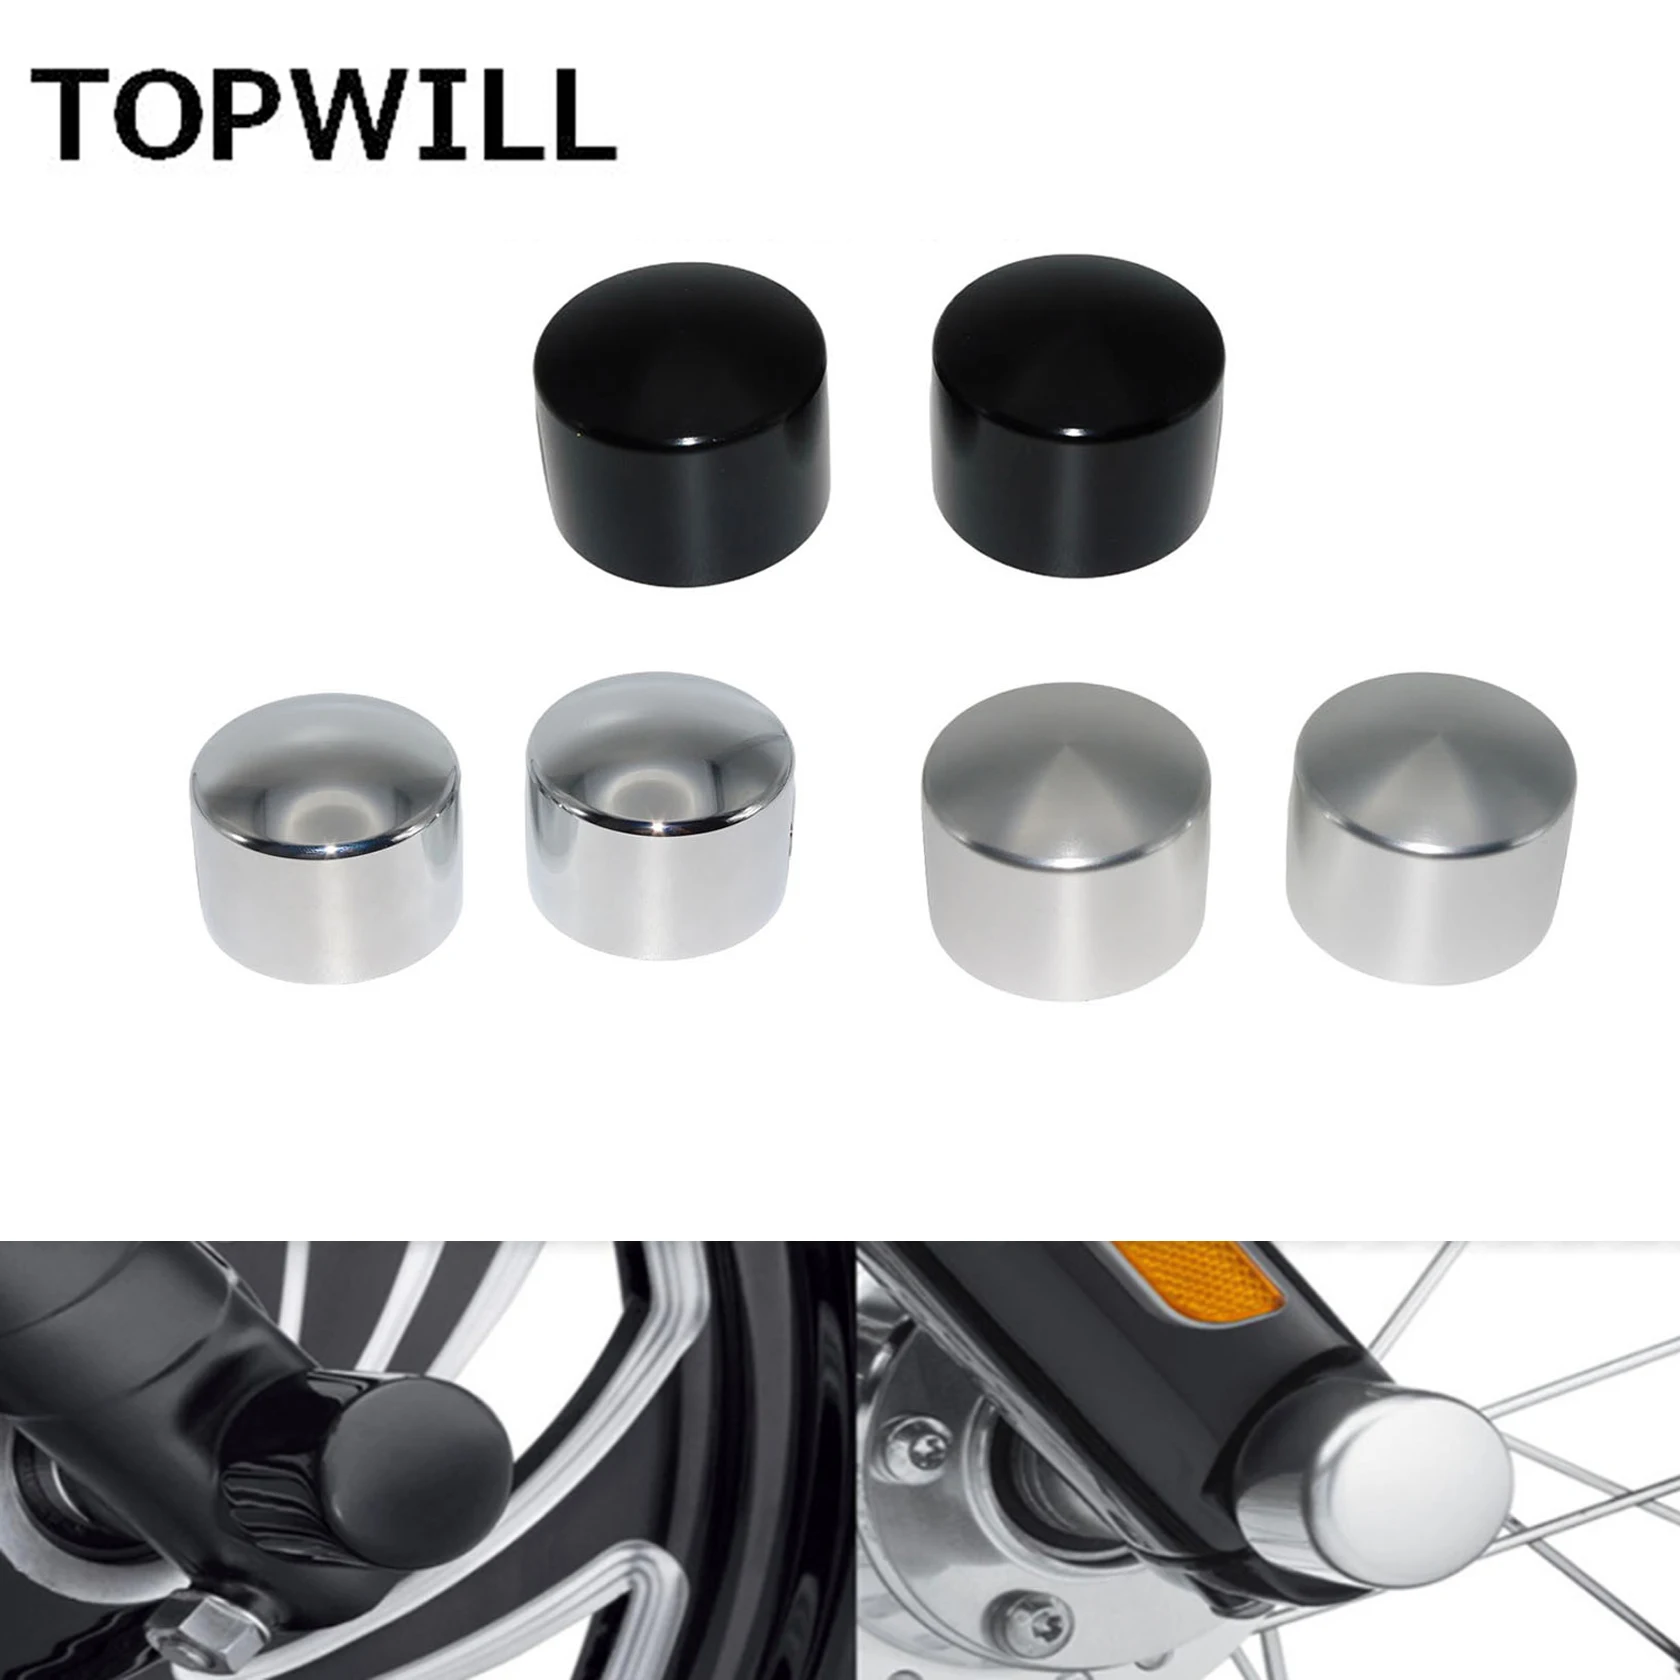 

2xMotorcycle Front Axle Nut Cover Cap Bolt Kit For Harley Touring Street Road Glide Dyna Softail Fat Bob V-Rod Sportster XL 883